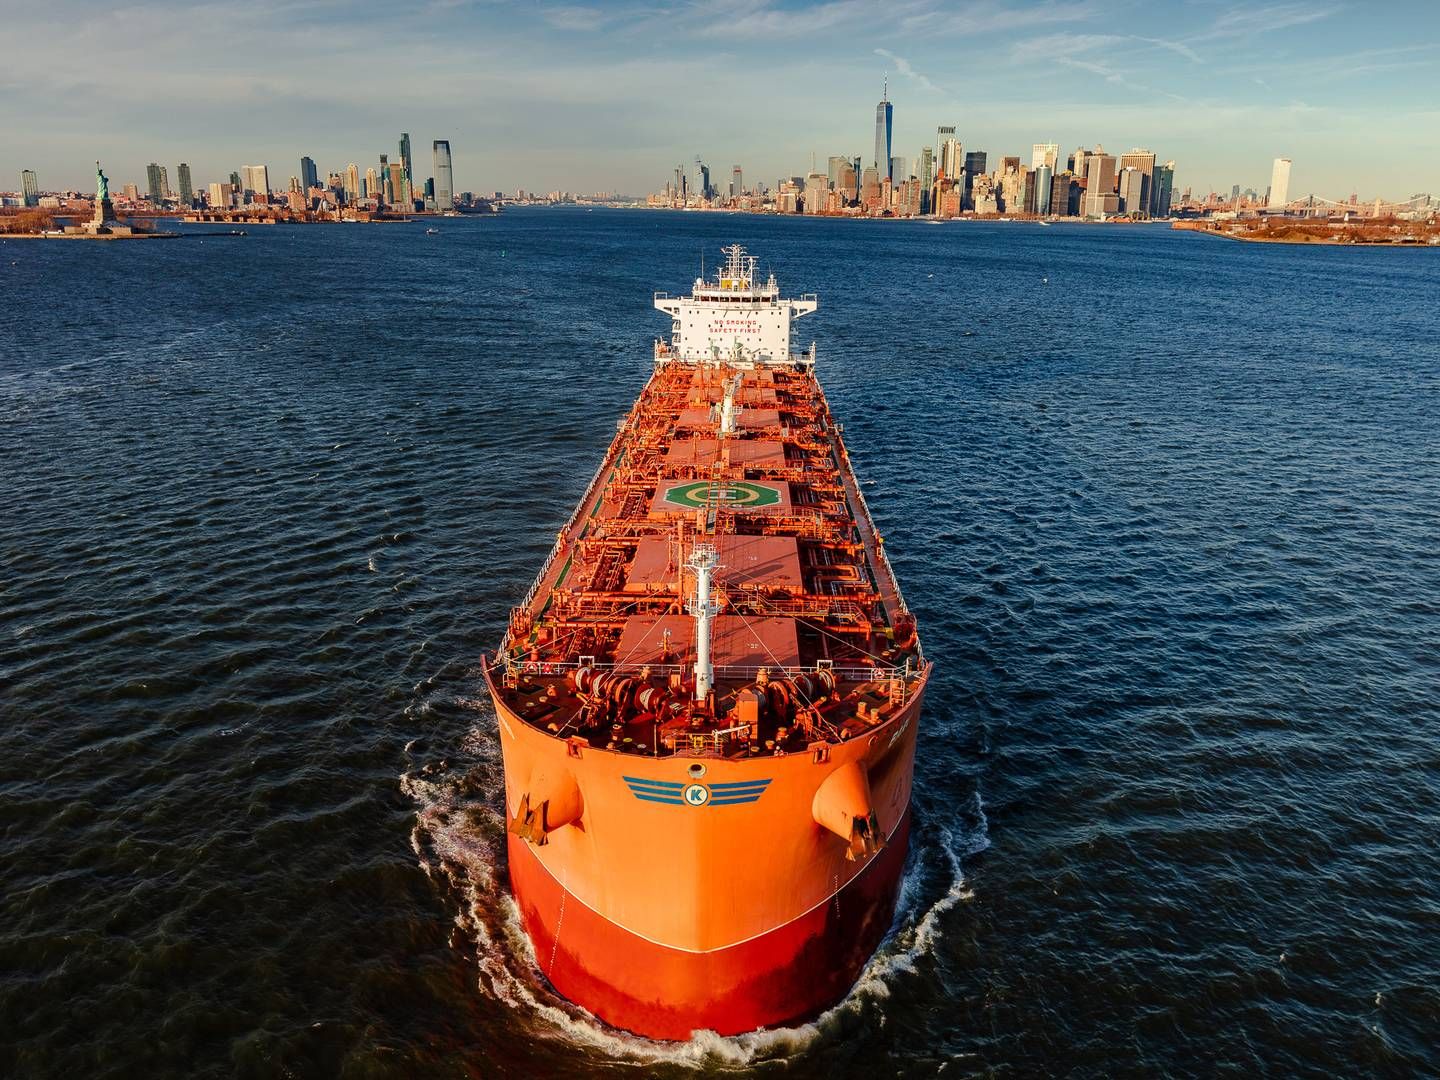 Klaveness Combination Carriers operates in both the tanker and bulk market. | Photo: Klaveness Combination Carriers